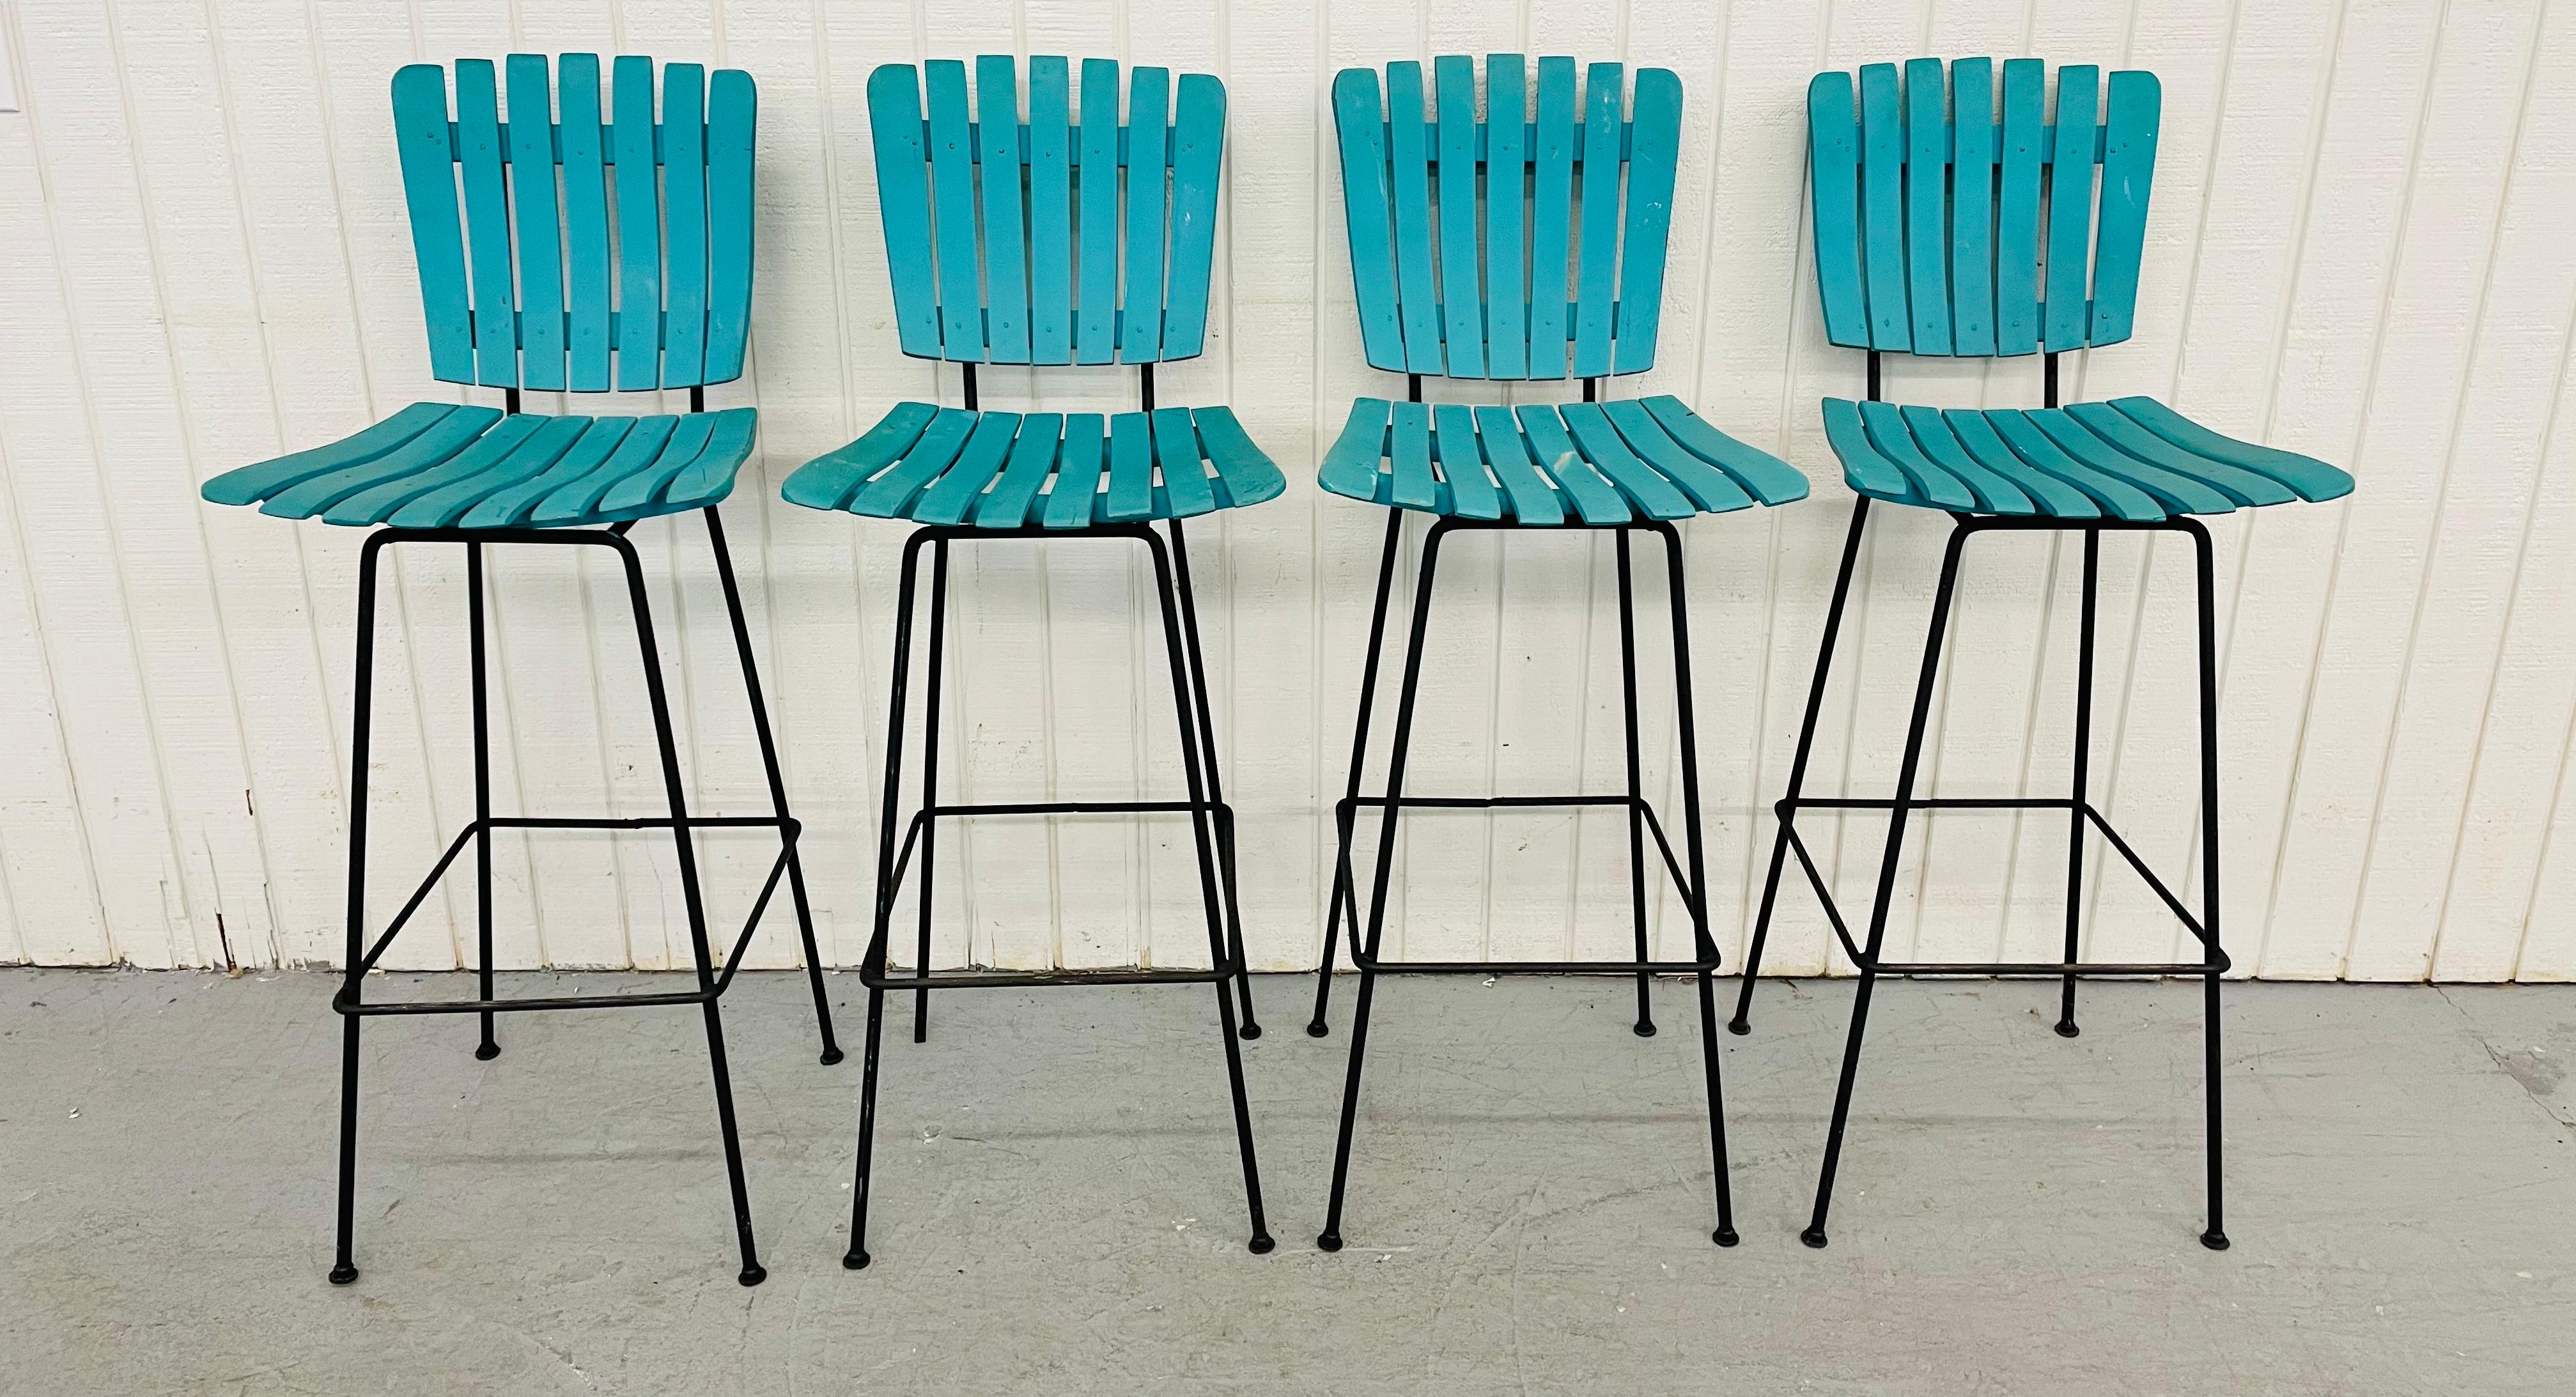 This listing is for a set of four Mid-Century Arthur Umanoff Slatted bar stools. Featuring an iron frame, vintage turquoise paint over the walnut slatted seat and backrest.